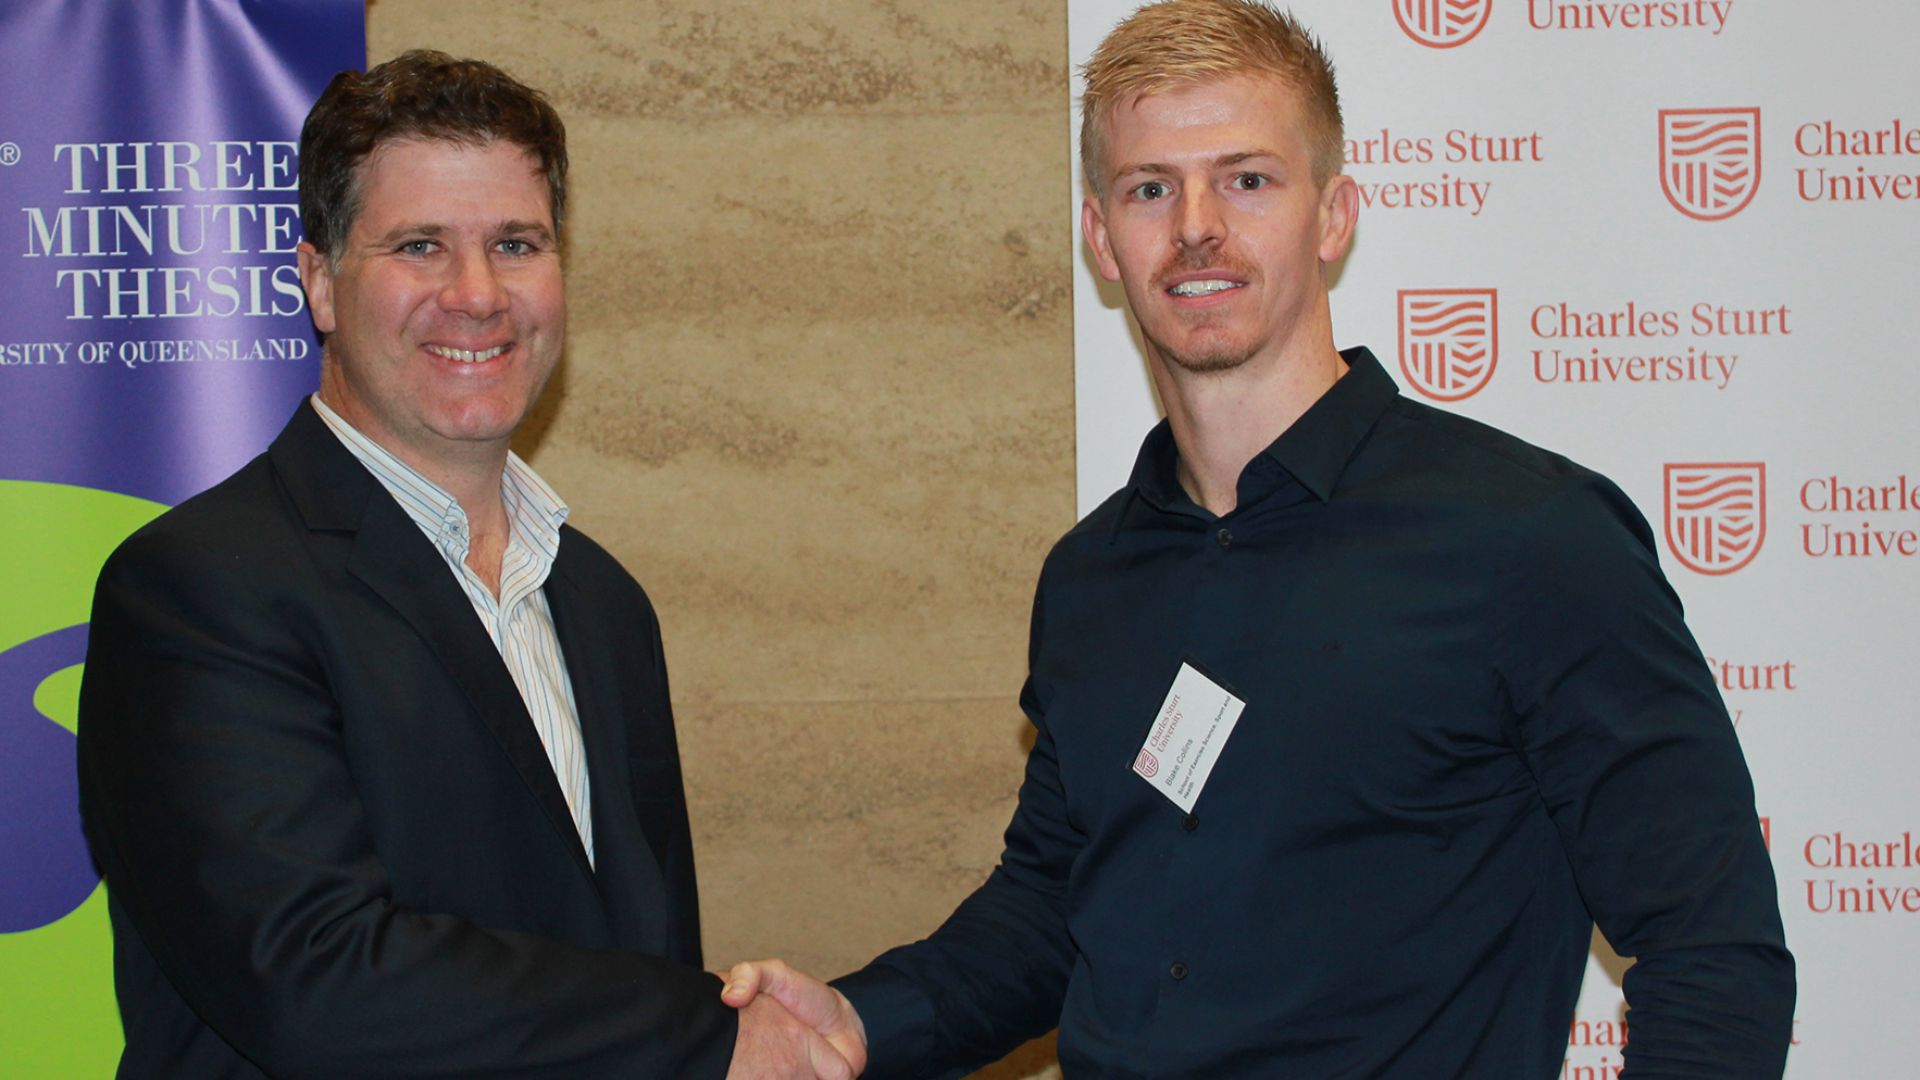 Exercise science PhD student represents Charles Sturt at 3MT Asia-Pacific finals